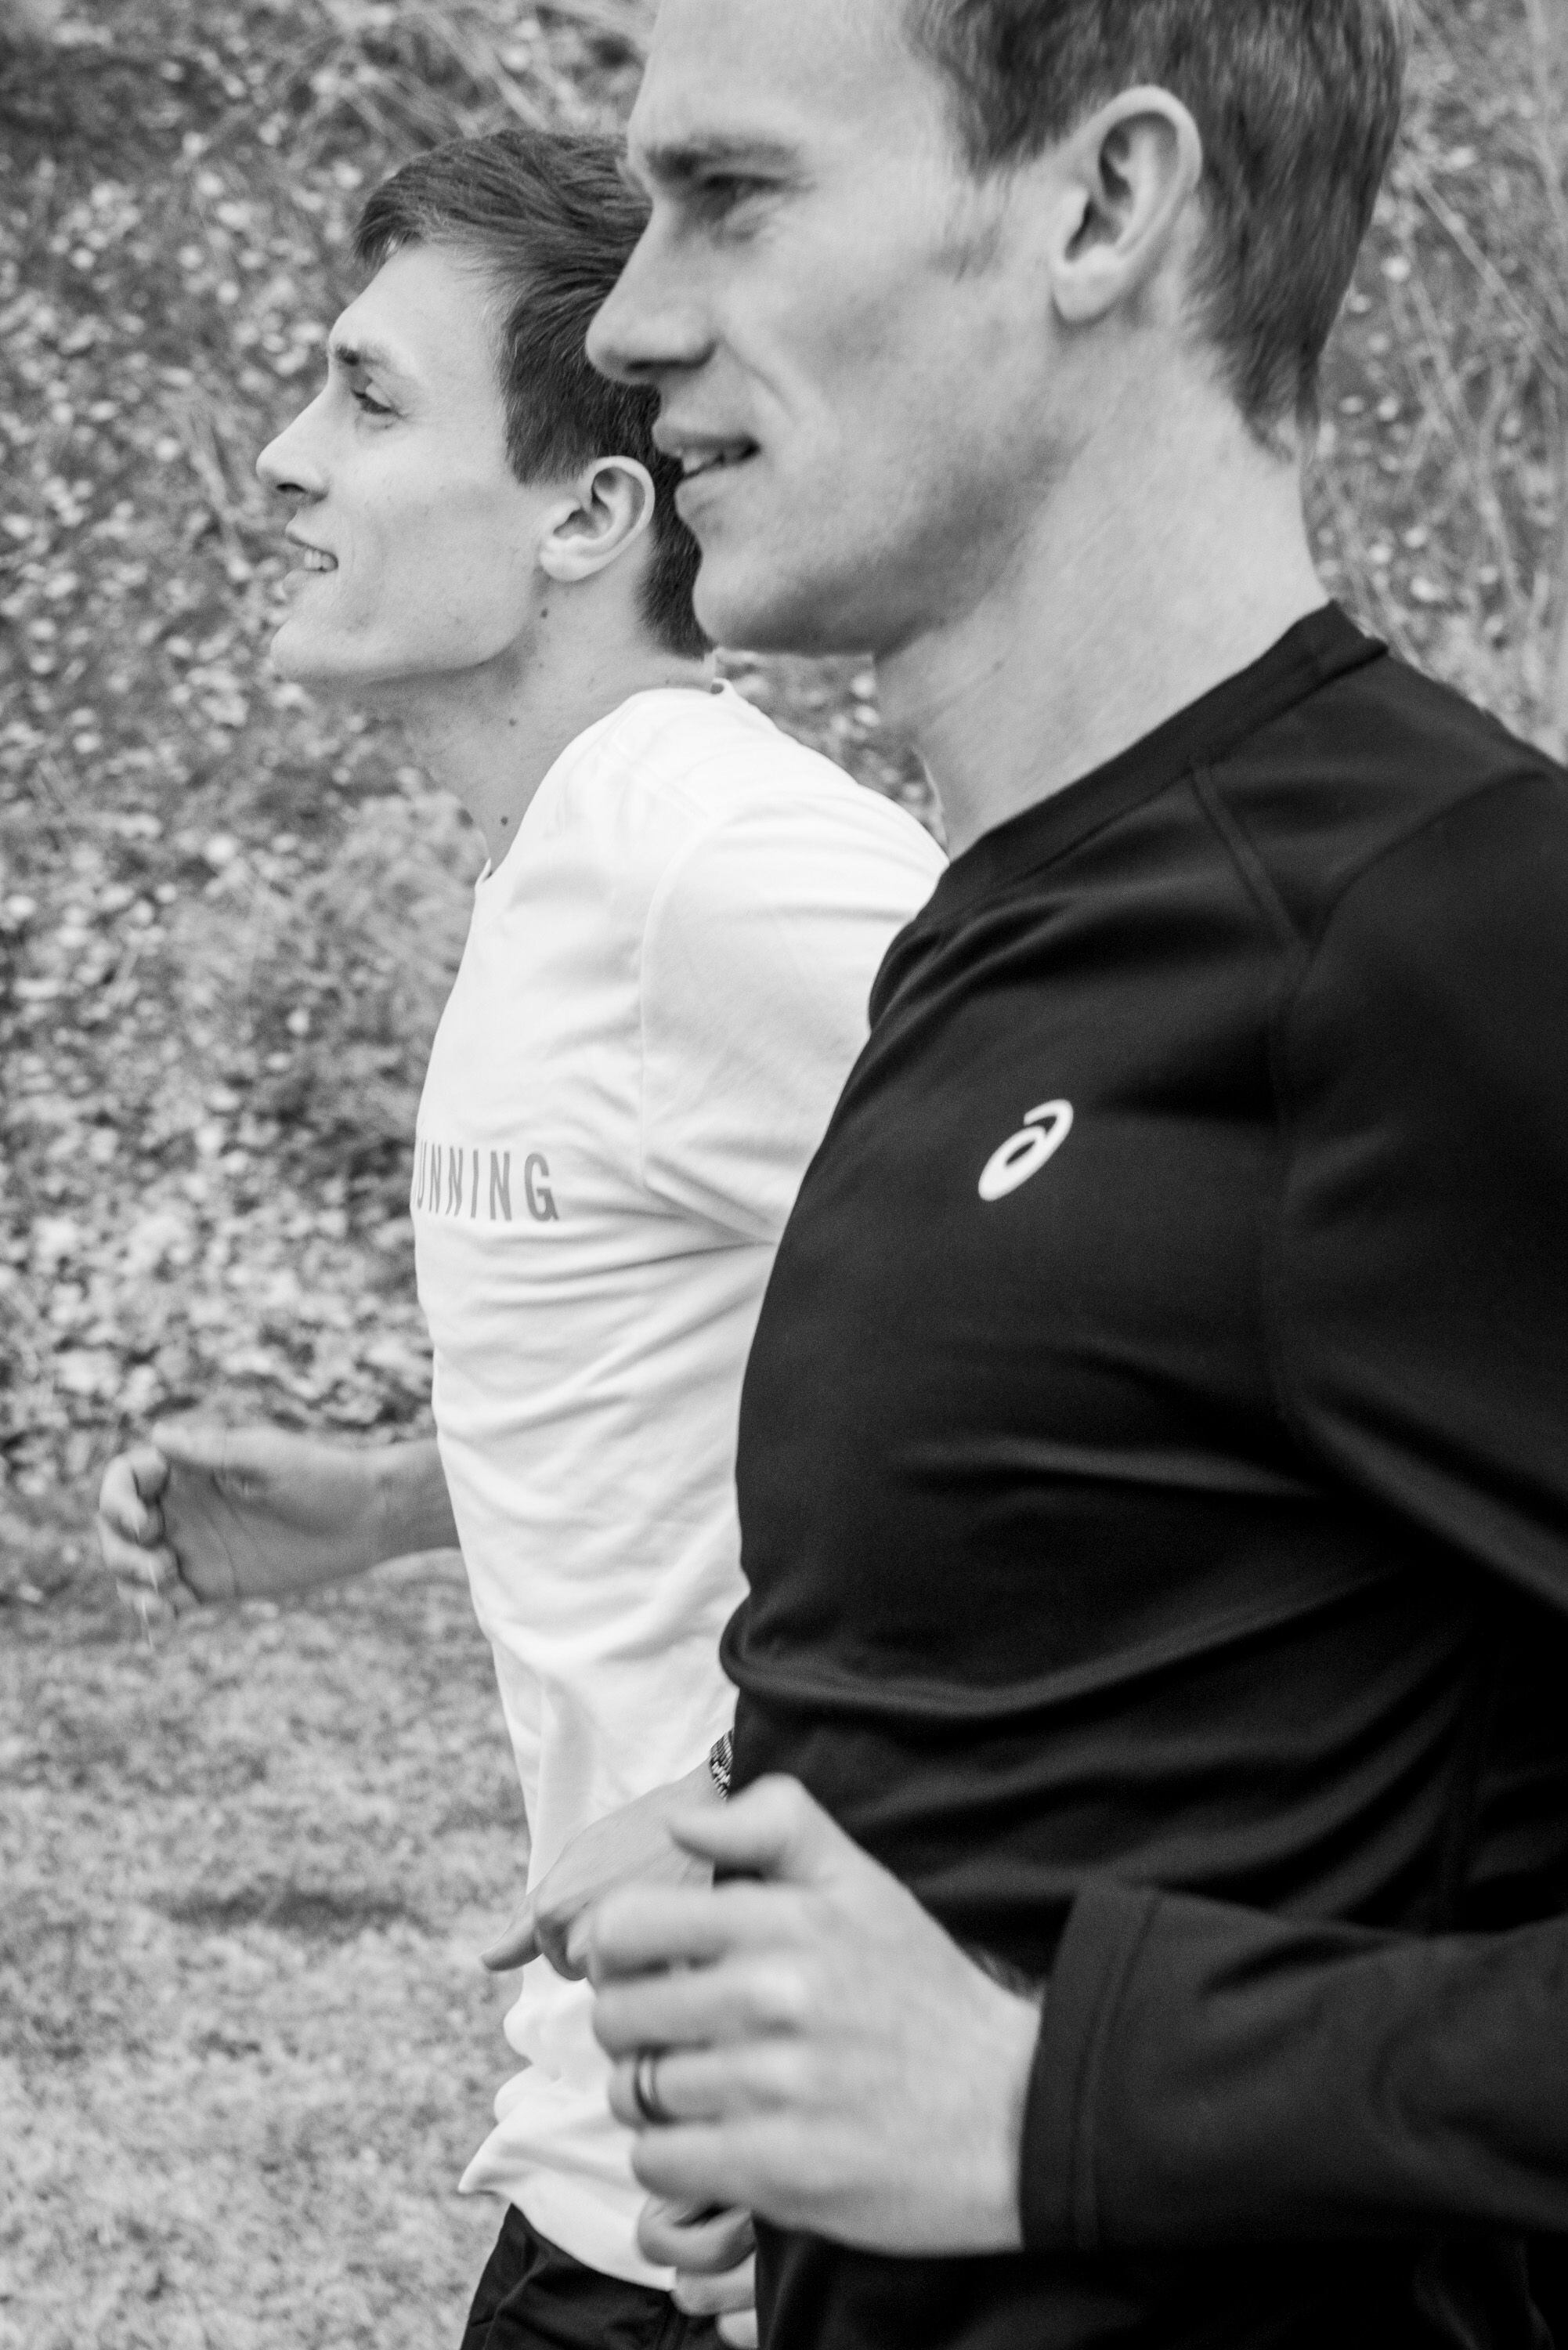 (Russel Daniels | The New York Times) Conner Mantz, left, and Clayton Young warm up at a park in Springville, Utah, March 11, 2024. The close friends ran more than 10,000 miles together Ñ then they both vied for a place in the marathon at the Paris Olympics.